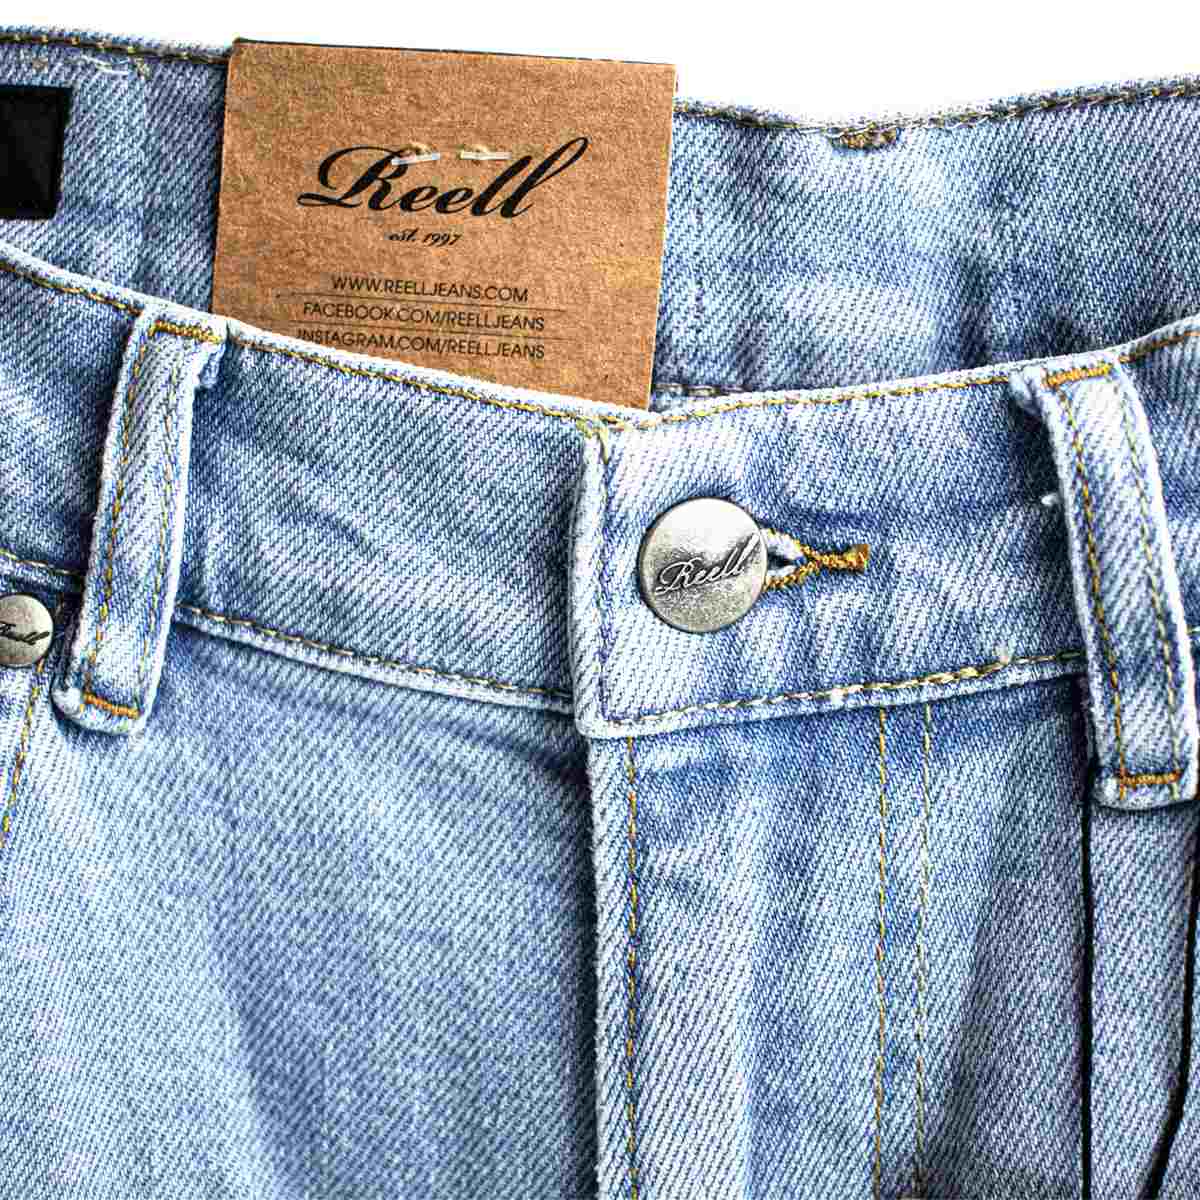 Reell Rave Jeans 1105-001/02-001 1301-